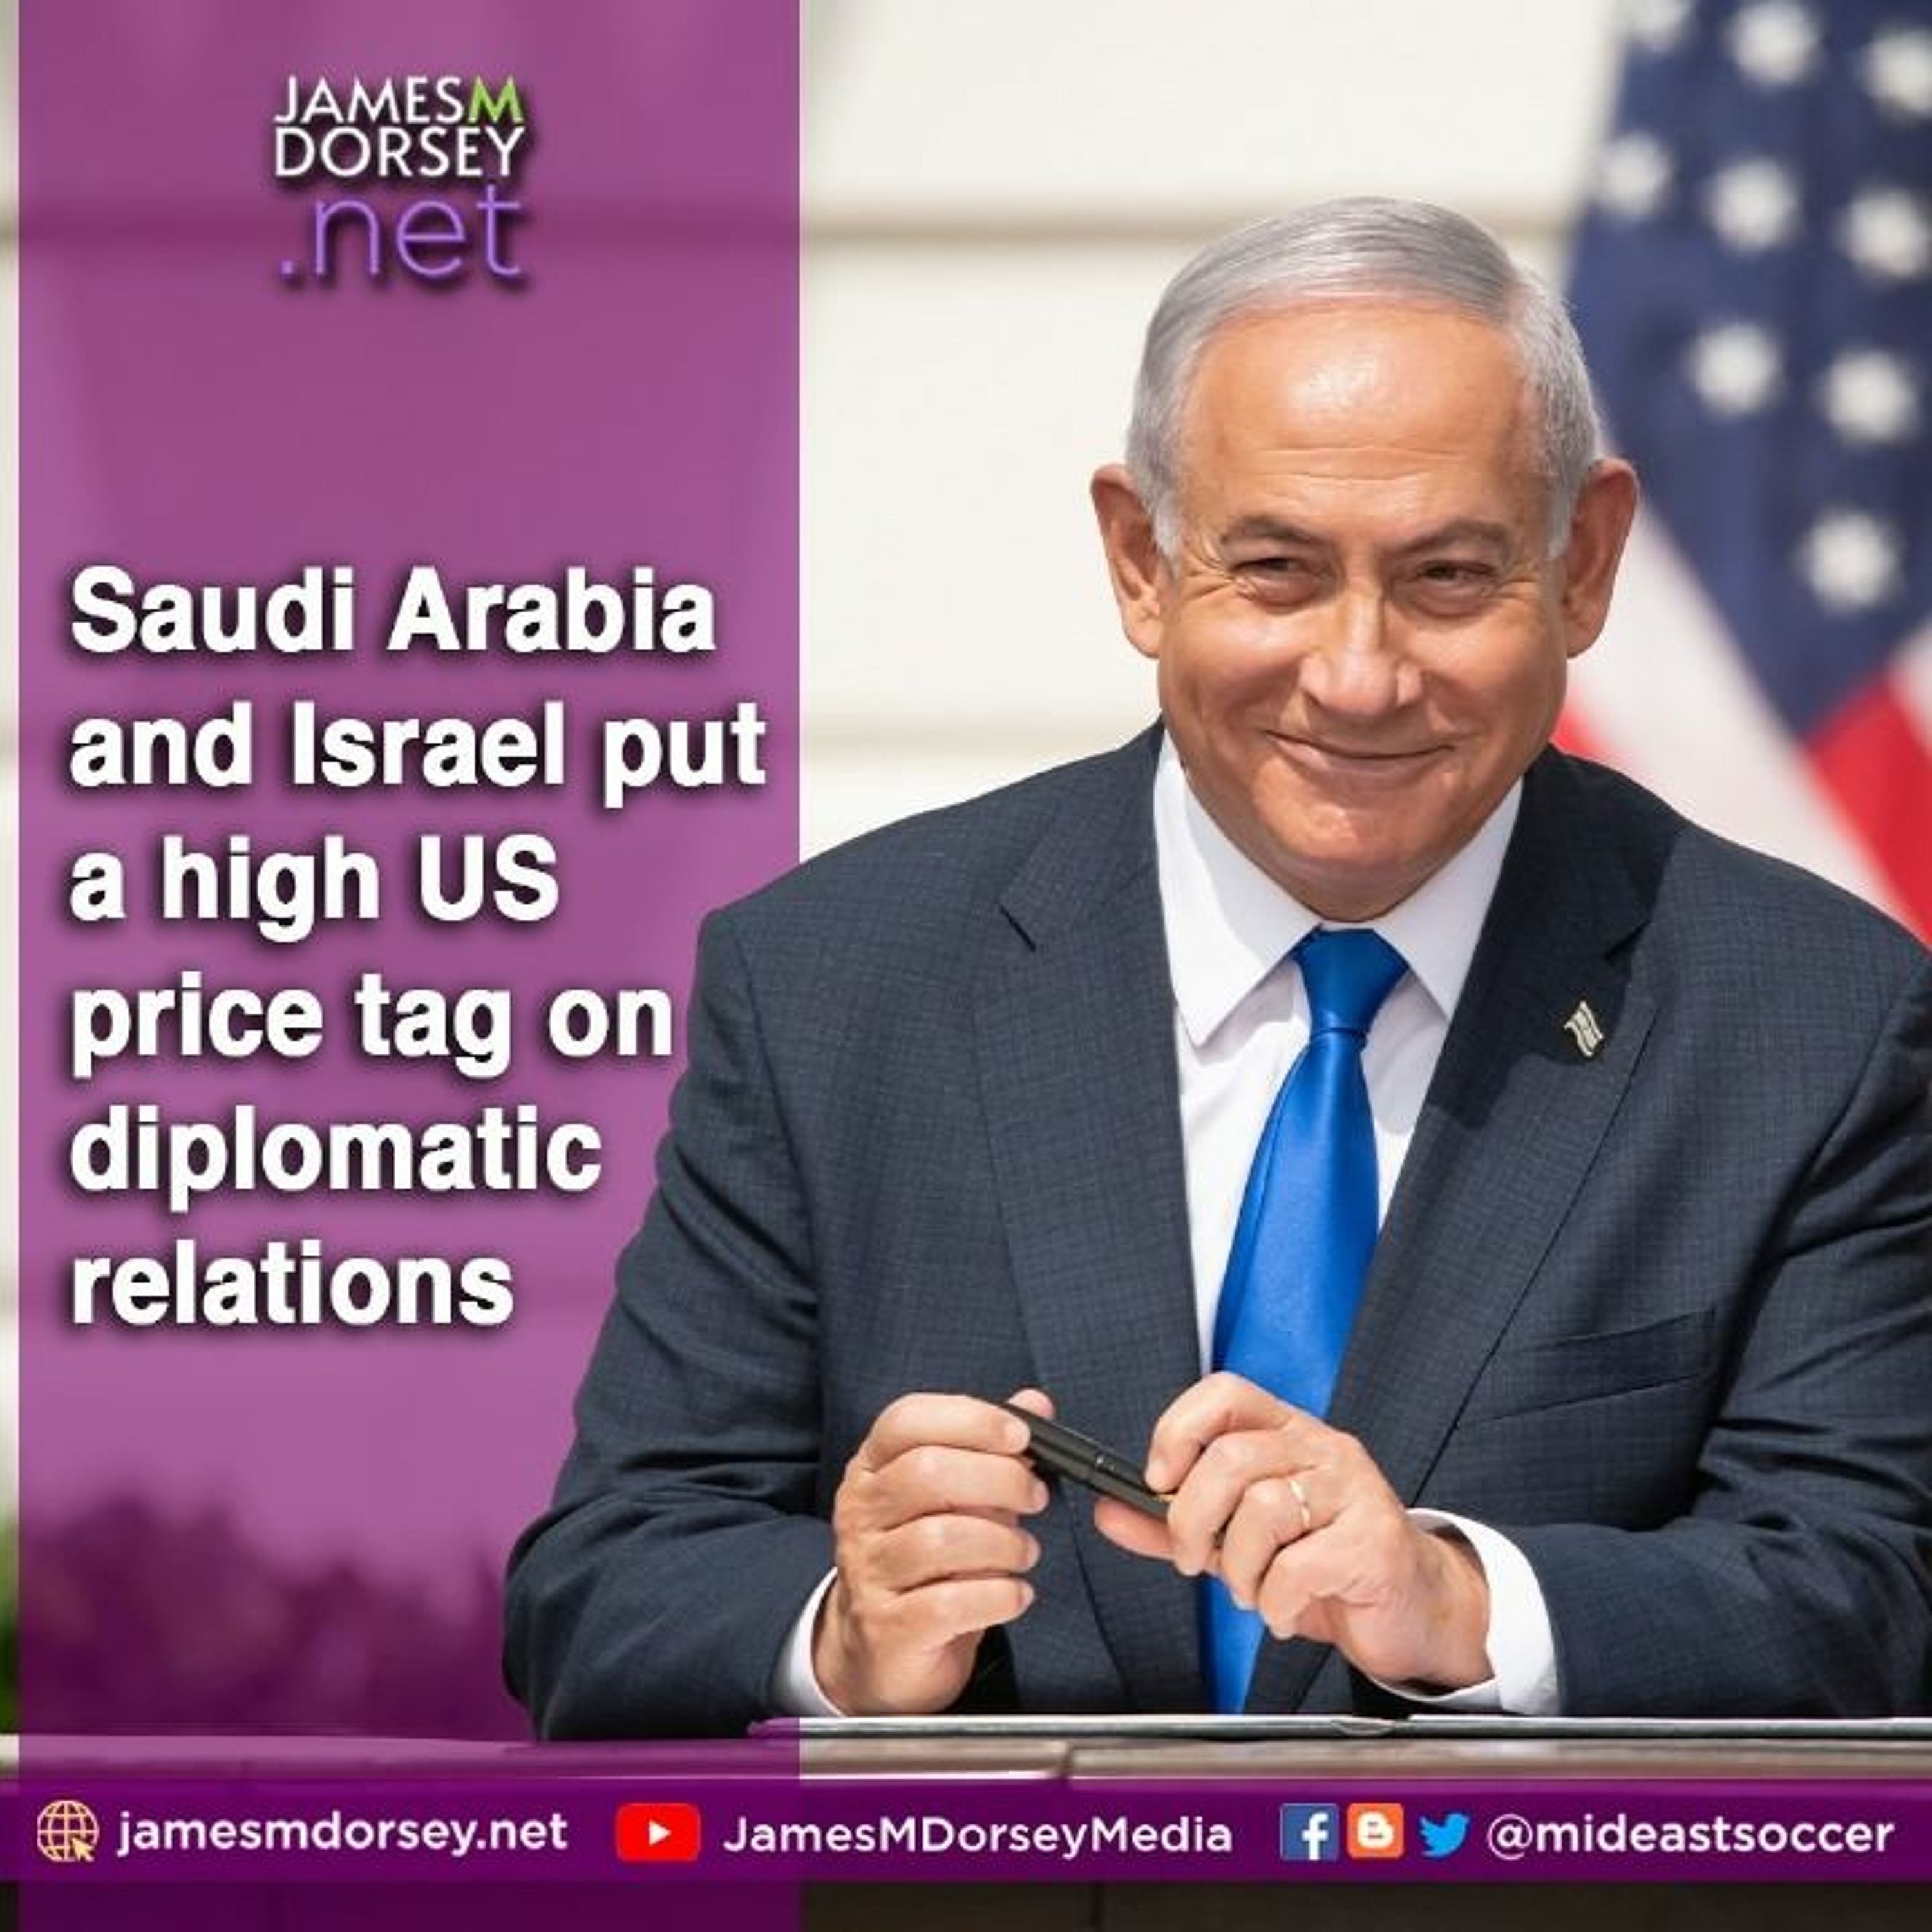 Saudi Arabia And Israel Put A High US Price Tag On Diplomatic Relations